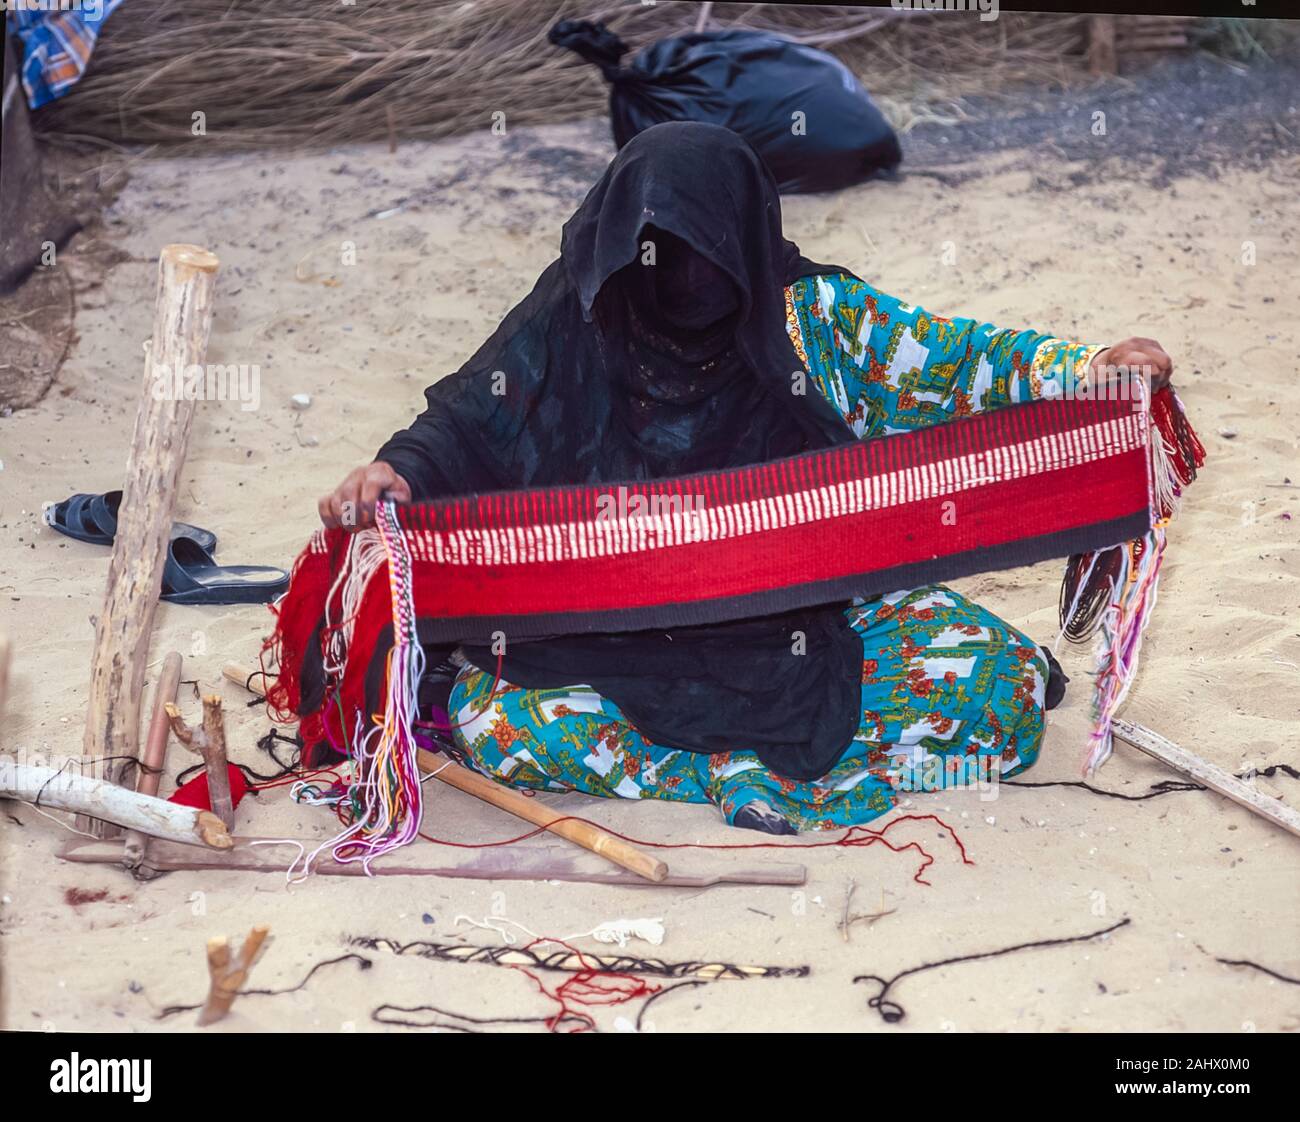 Dubai Arab folklore and history with an Emirati woman demonstrating weaving skills at the Shindagha Heritage Village located at the mouth of the Dubai Creek during the Dubai Trade Show and Festival in the United Arab Emirates Stock Photo